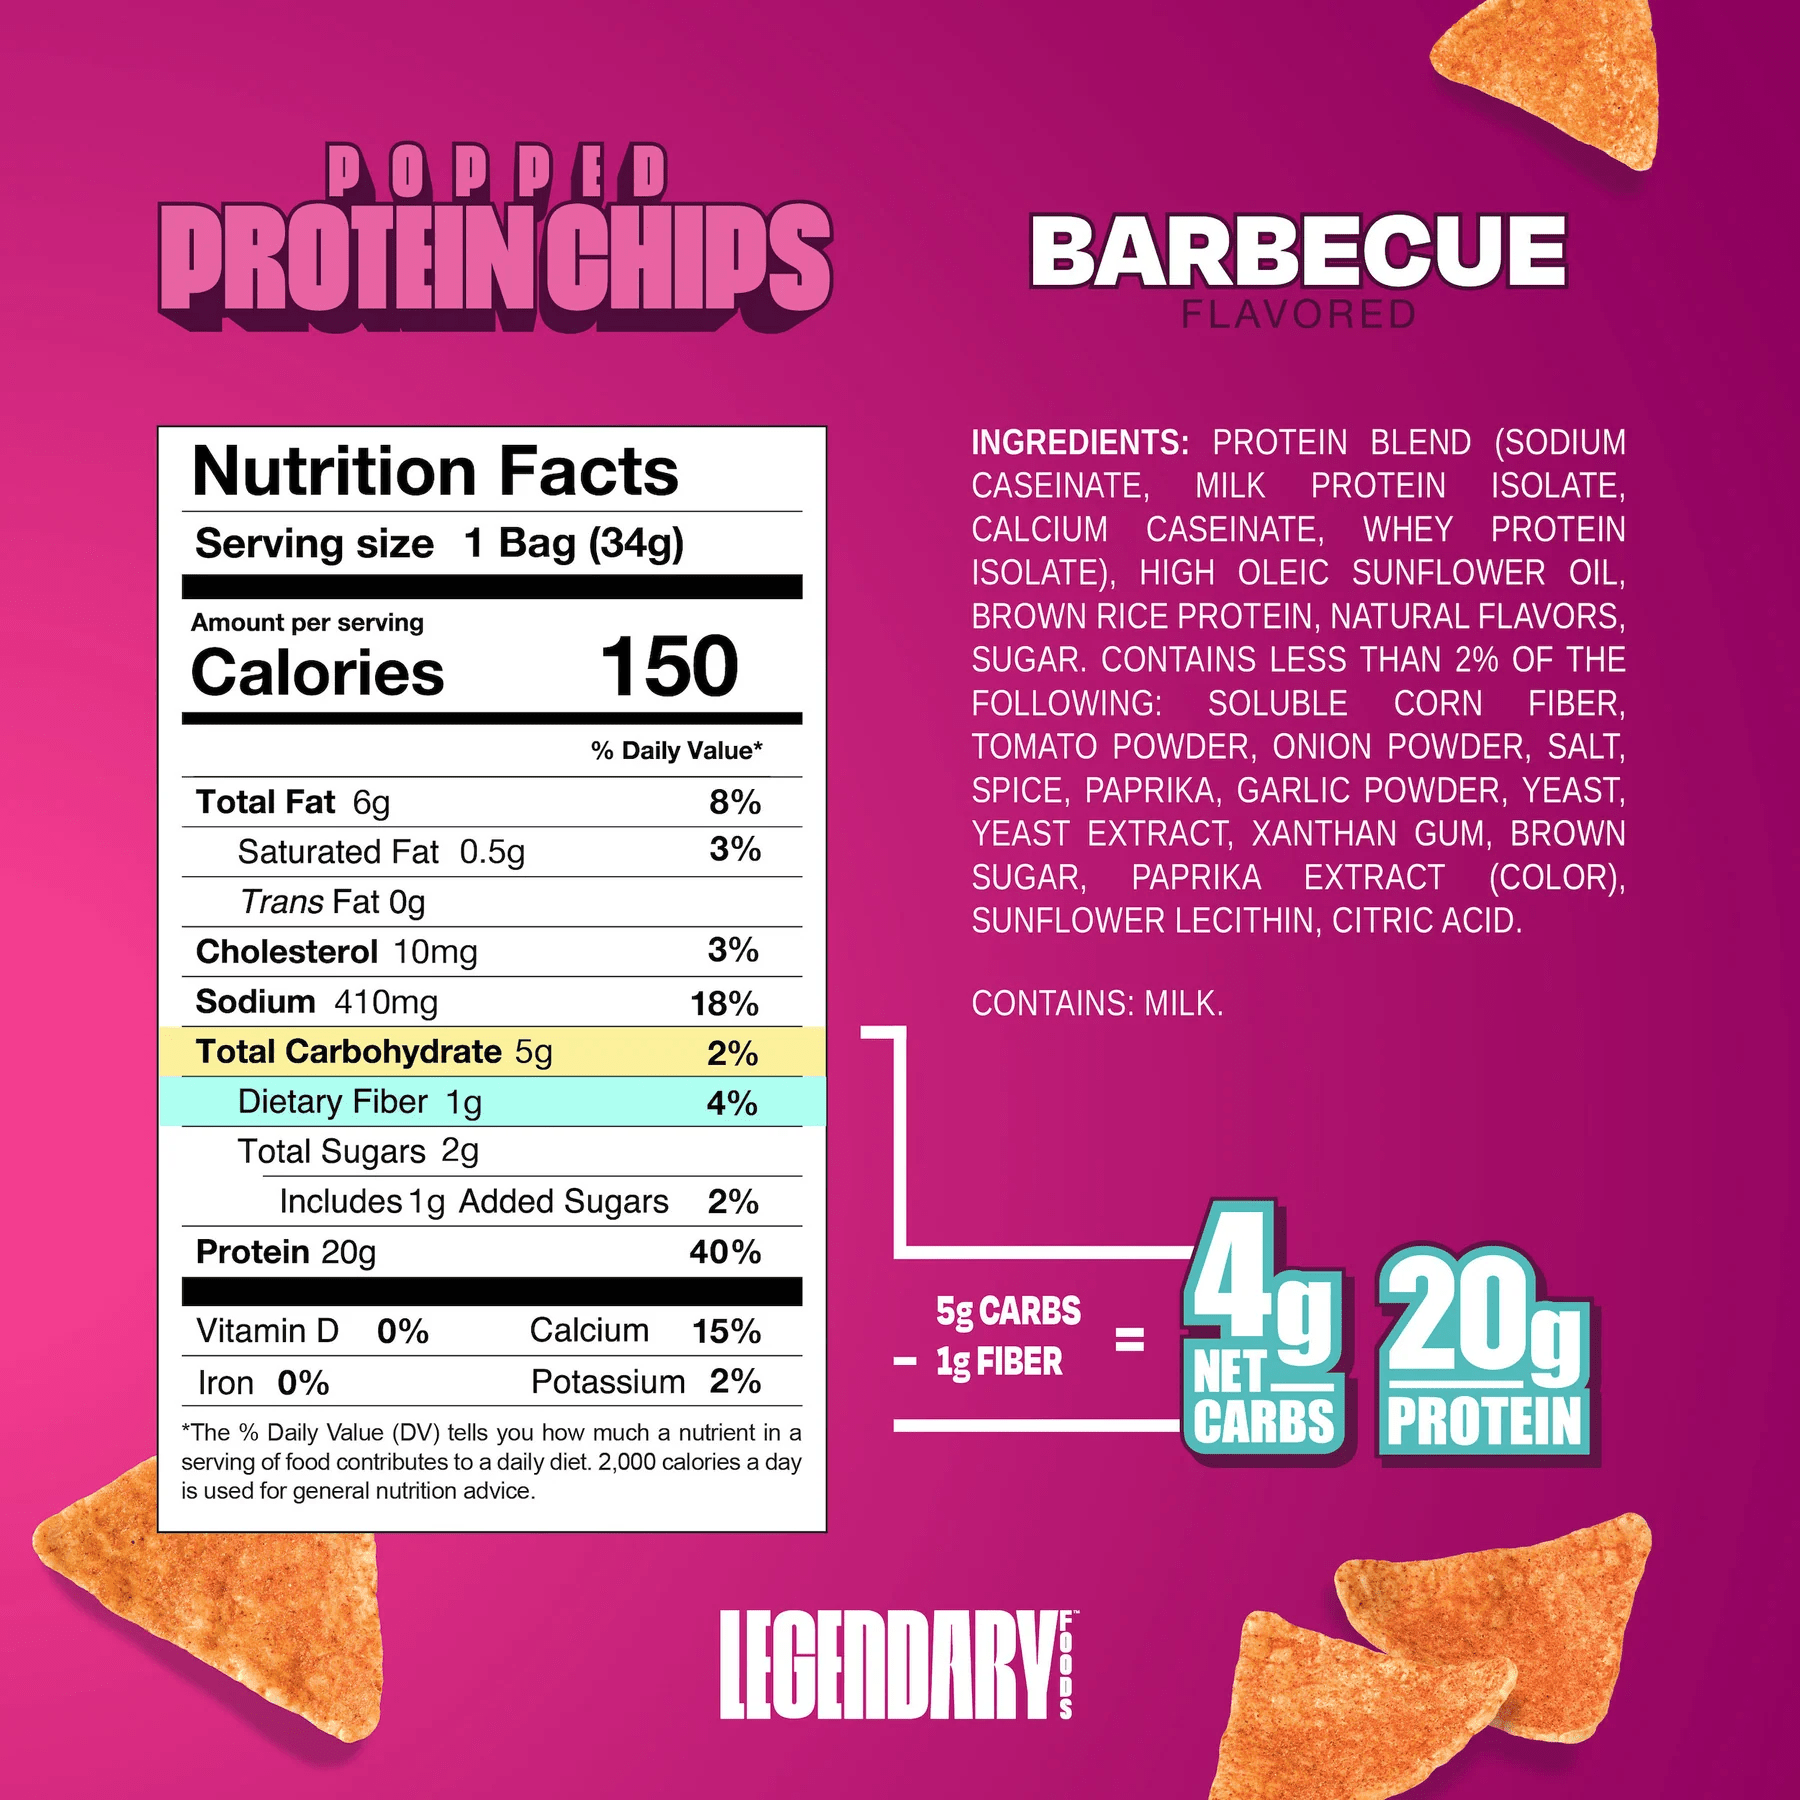 Legendary Barbecue Protein Chips